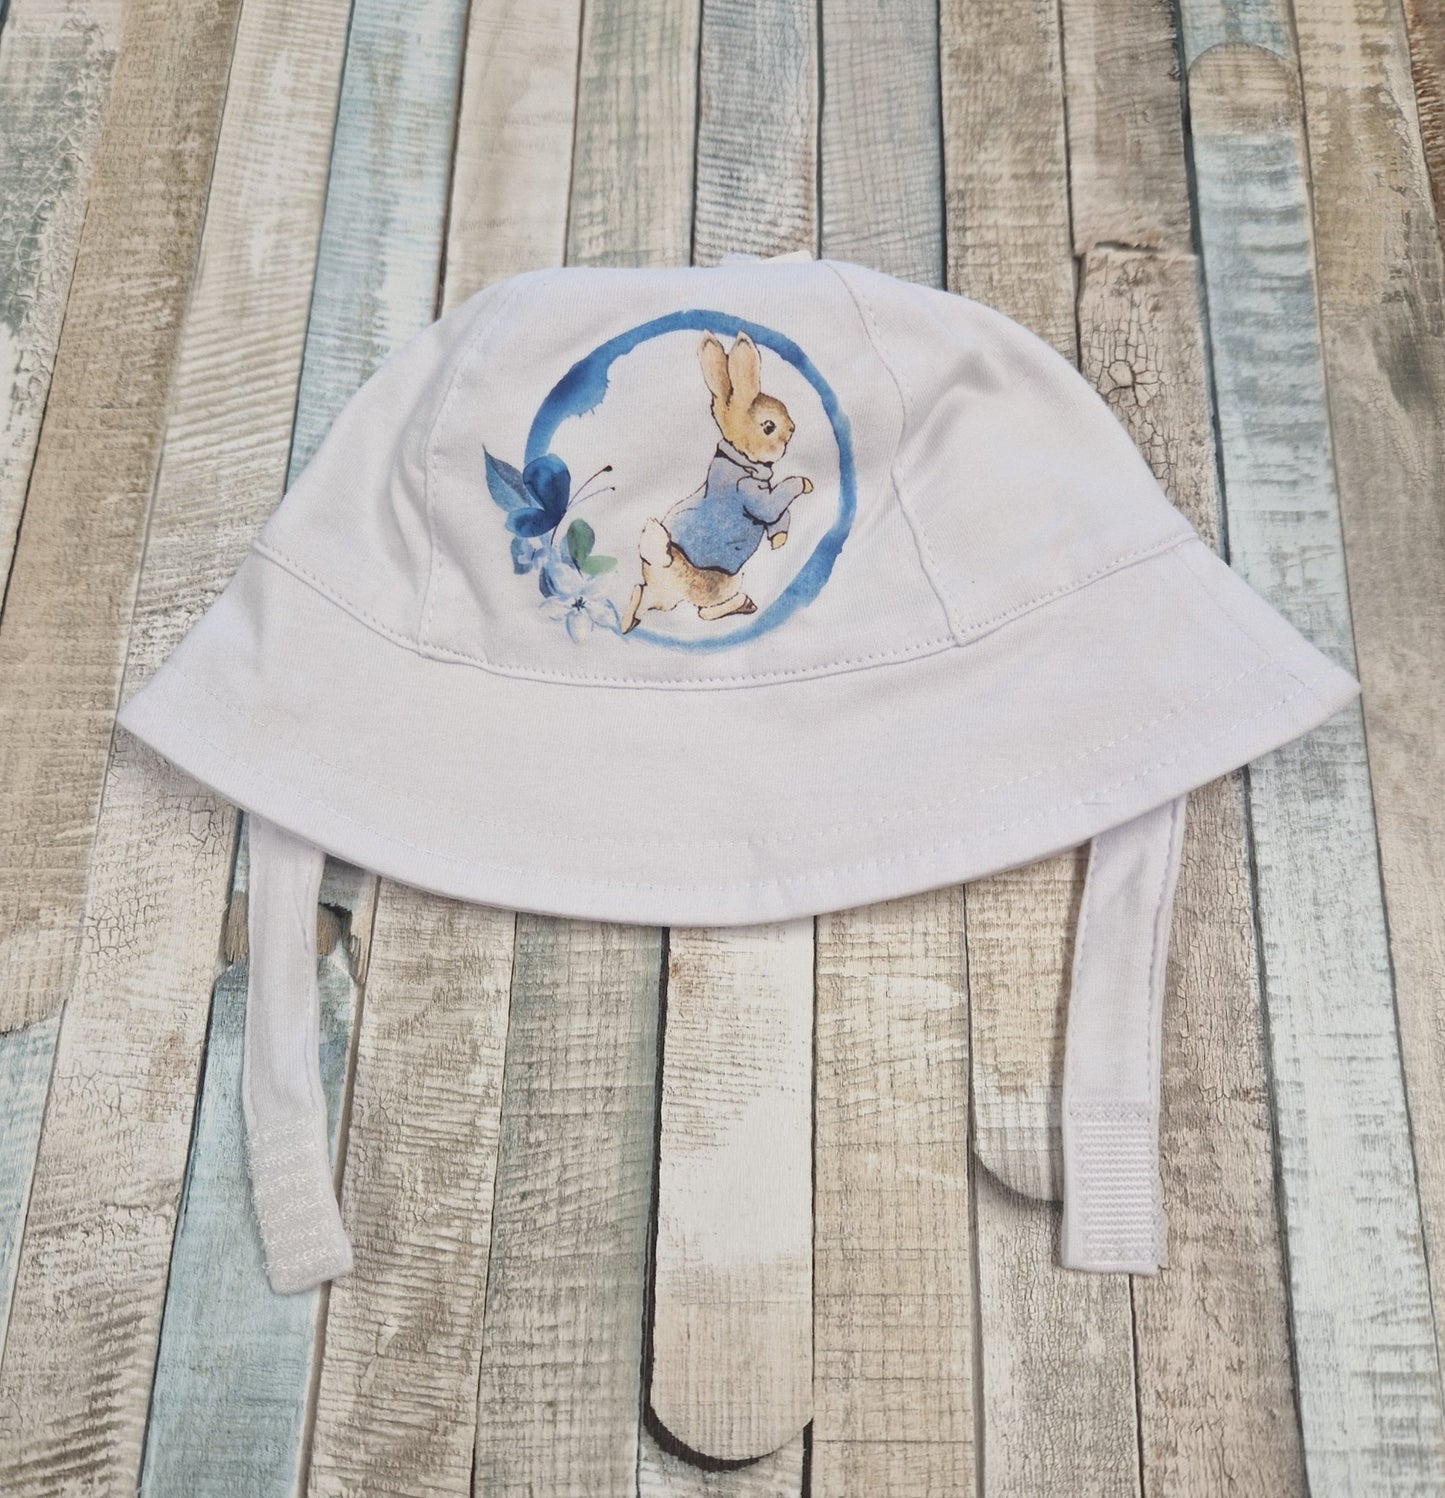 Baby Boys White Sunhat With Printed Blue Rabbit Design - Nana B Baby & Childrenswear Boutique